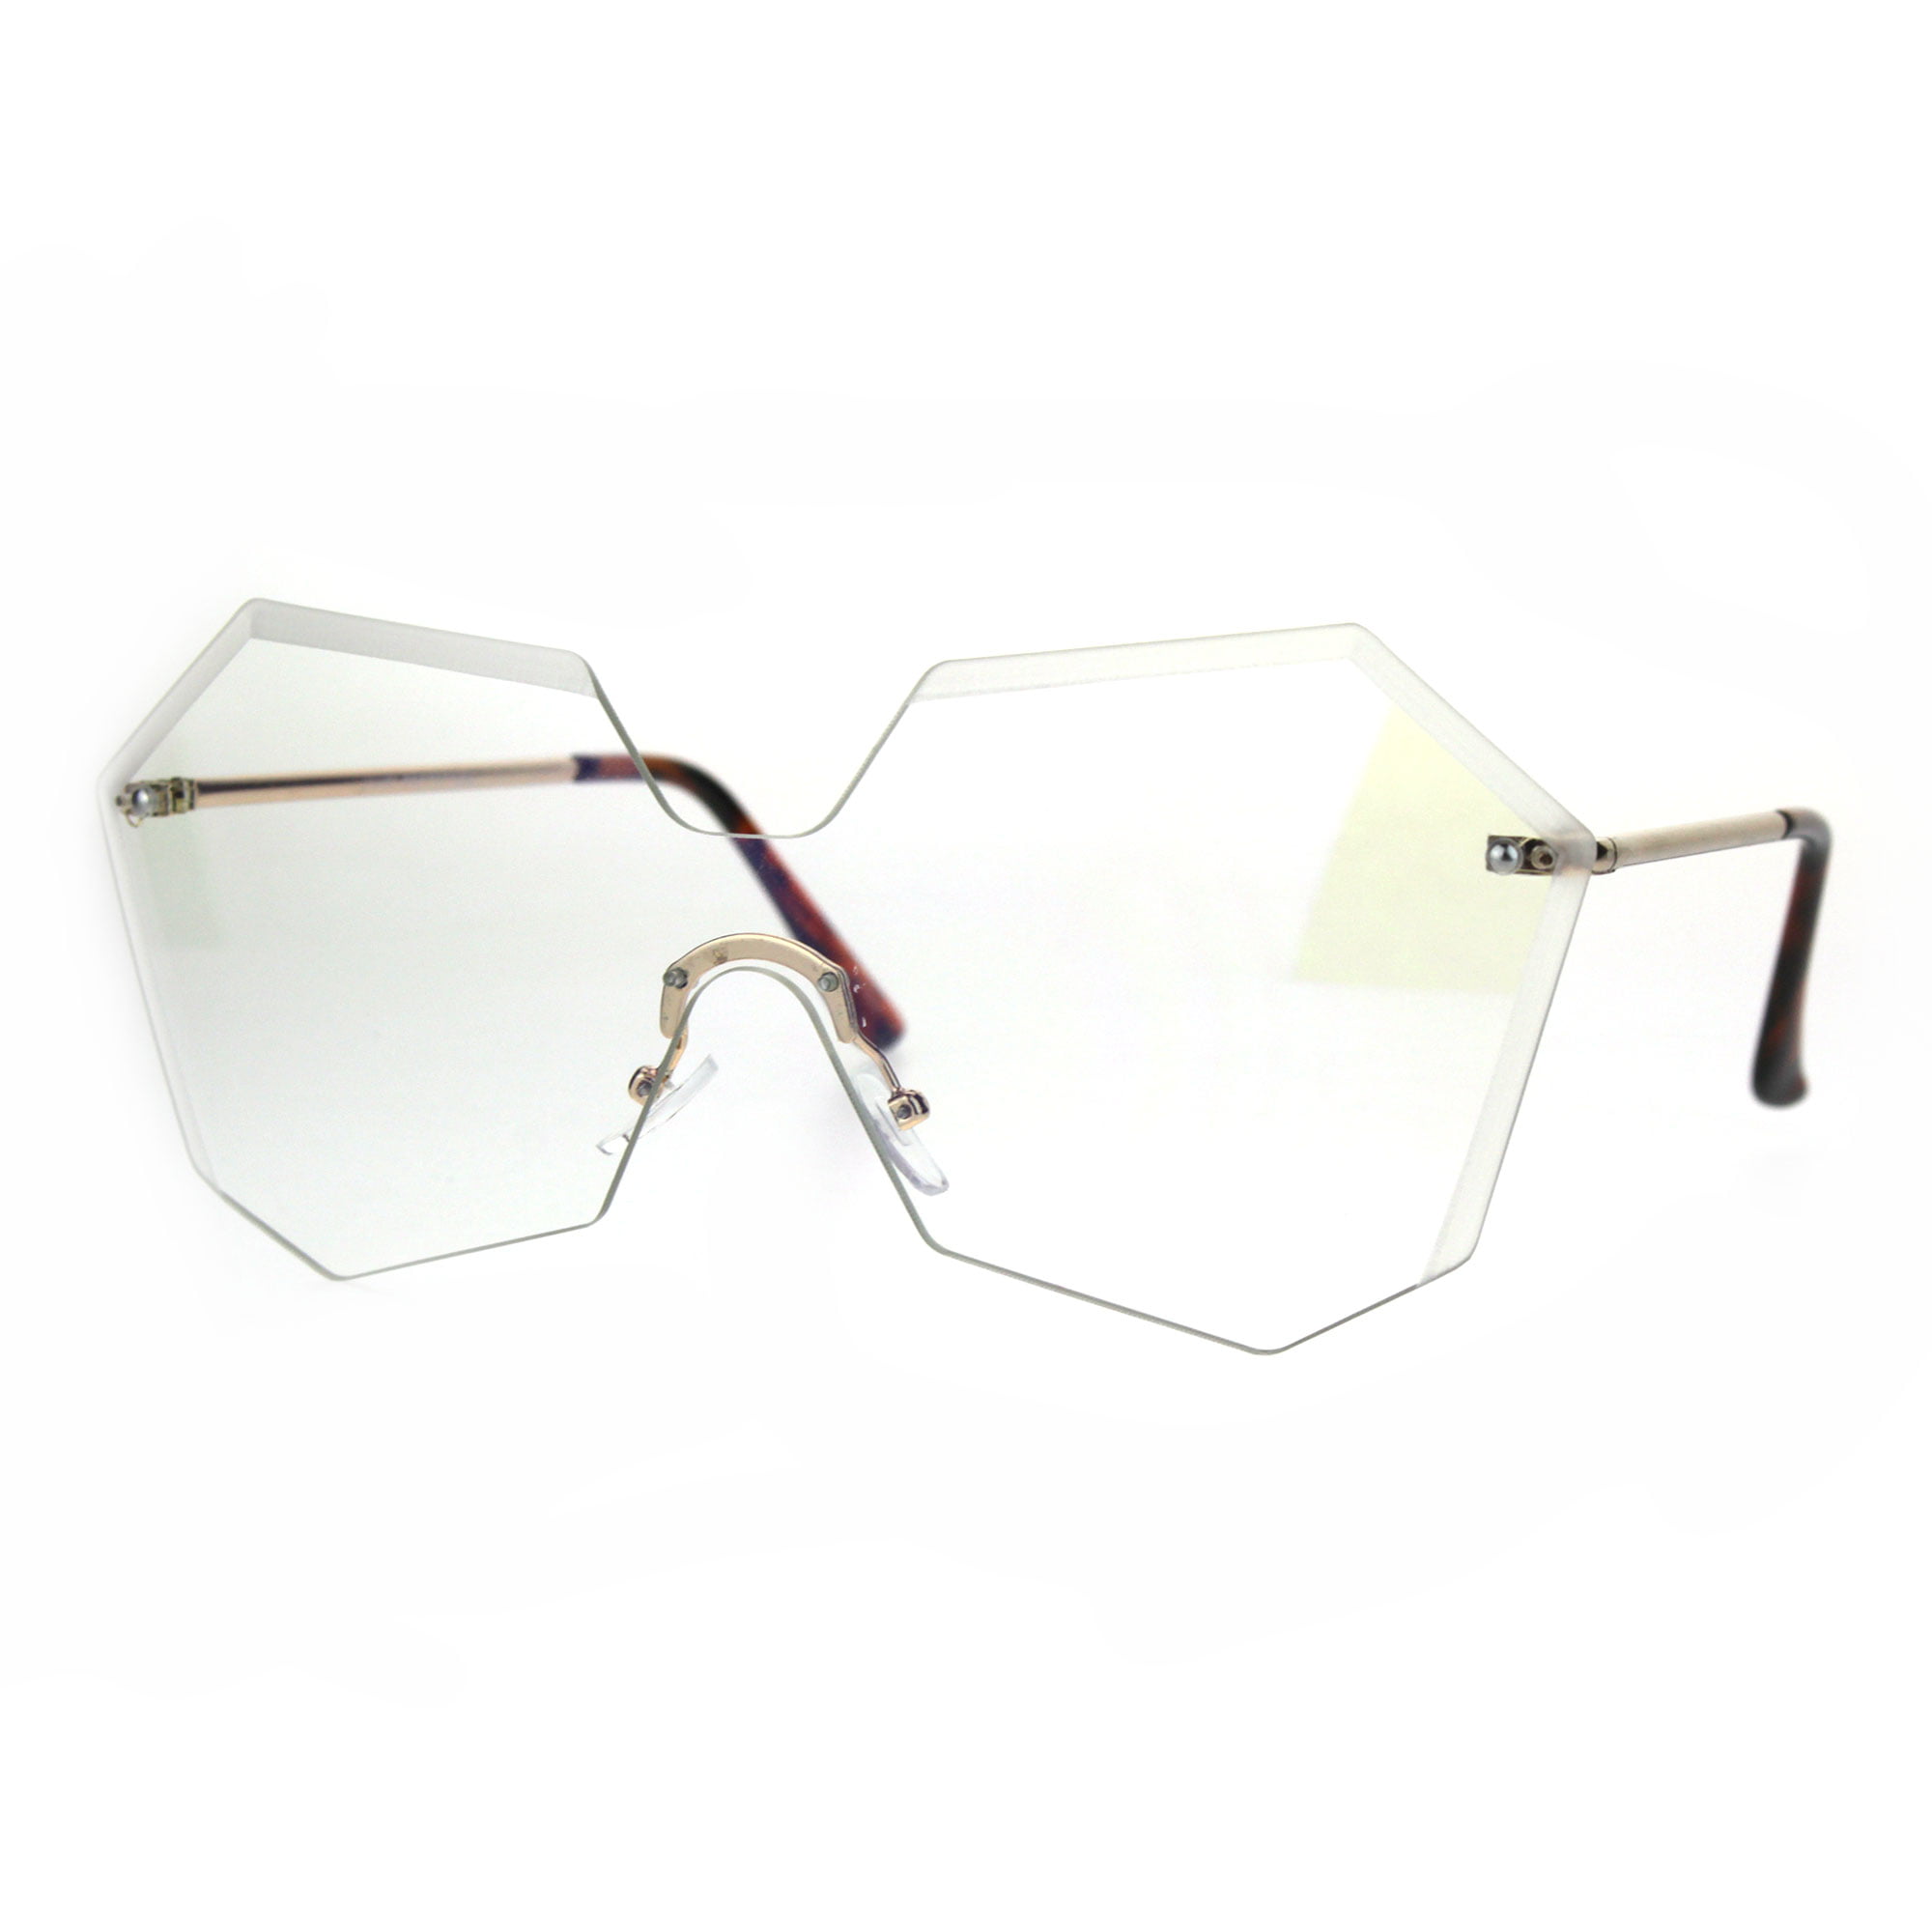 CLASSIC VINTAGE RETRO SHIELD Style Clear Lens EYE GLASSES Gold Metal Frame NEW 